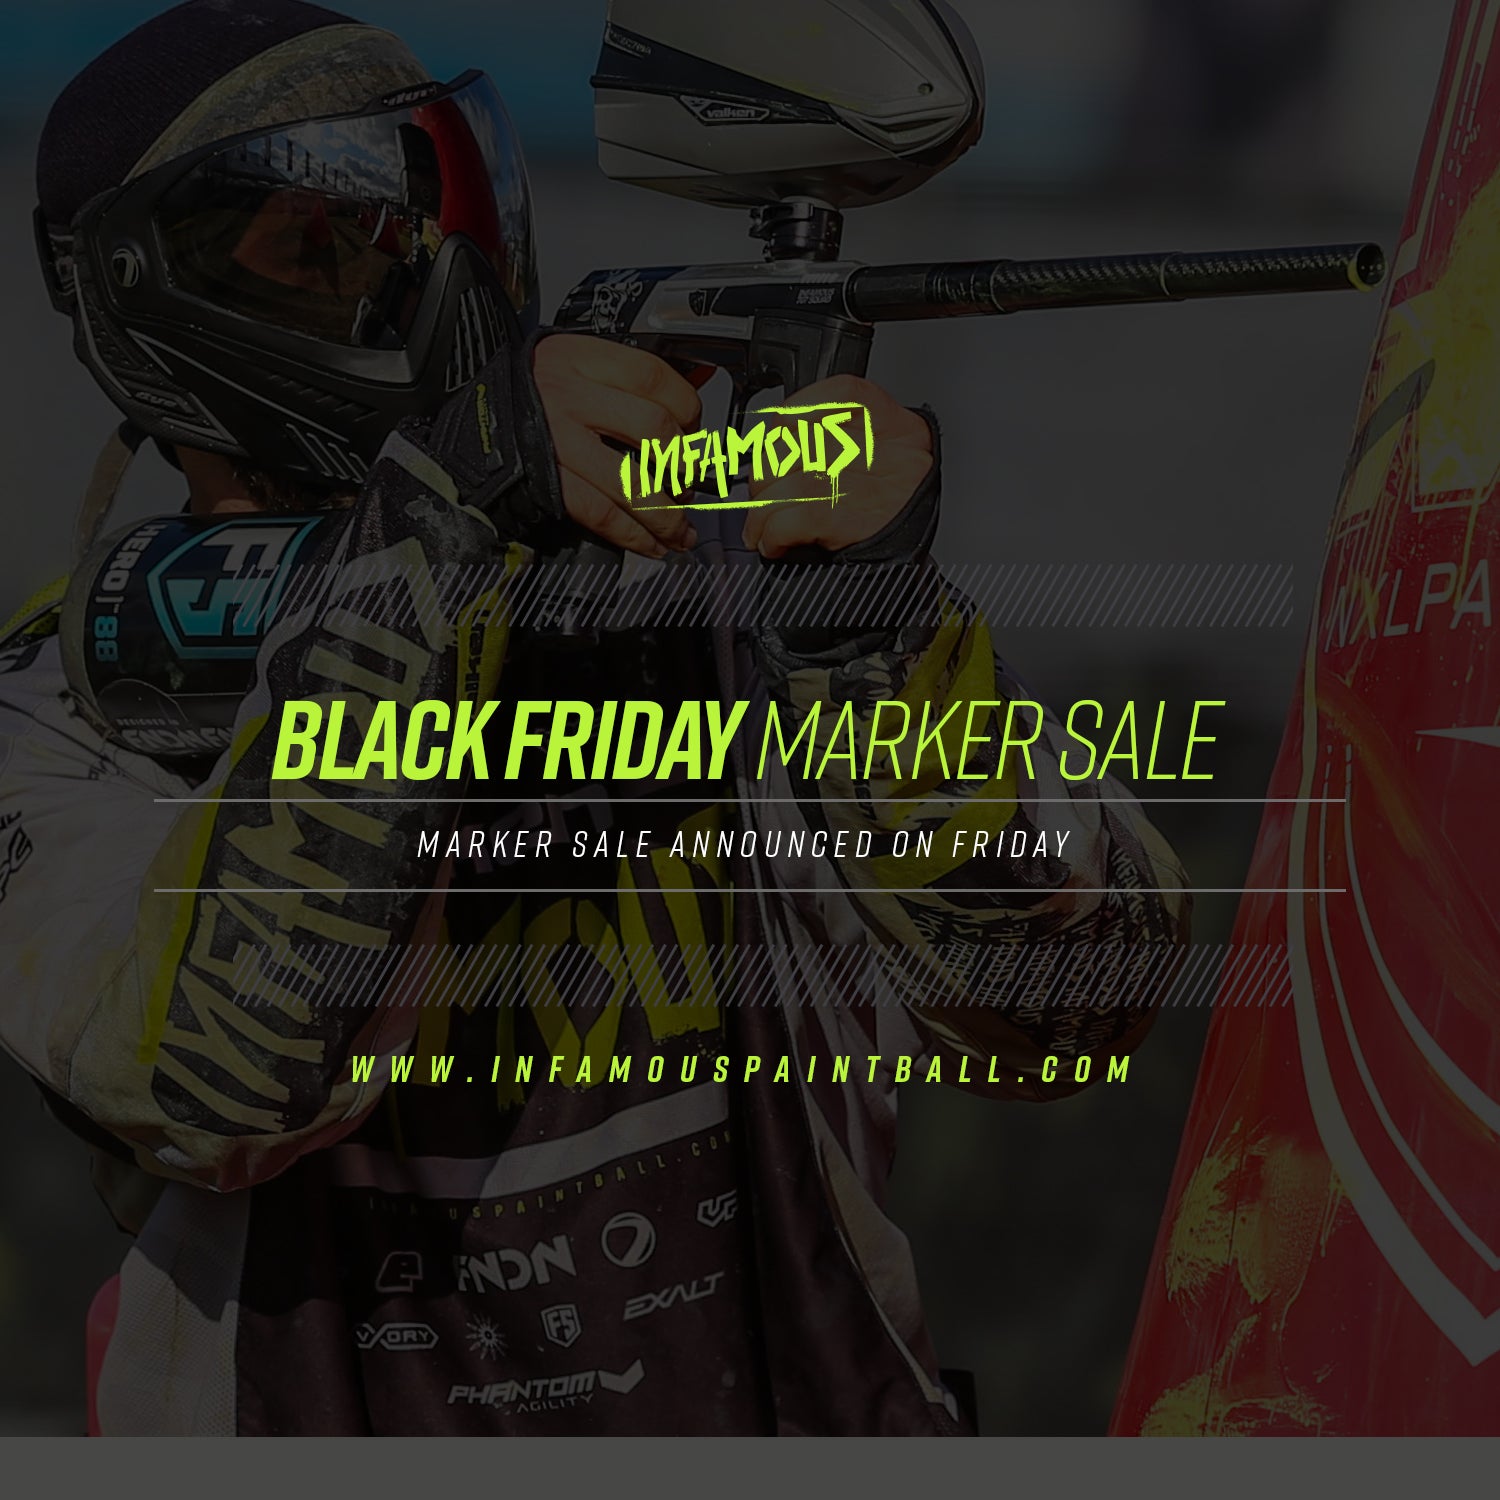 Black Friday Paintball Marker Sale - Infamous